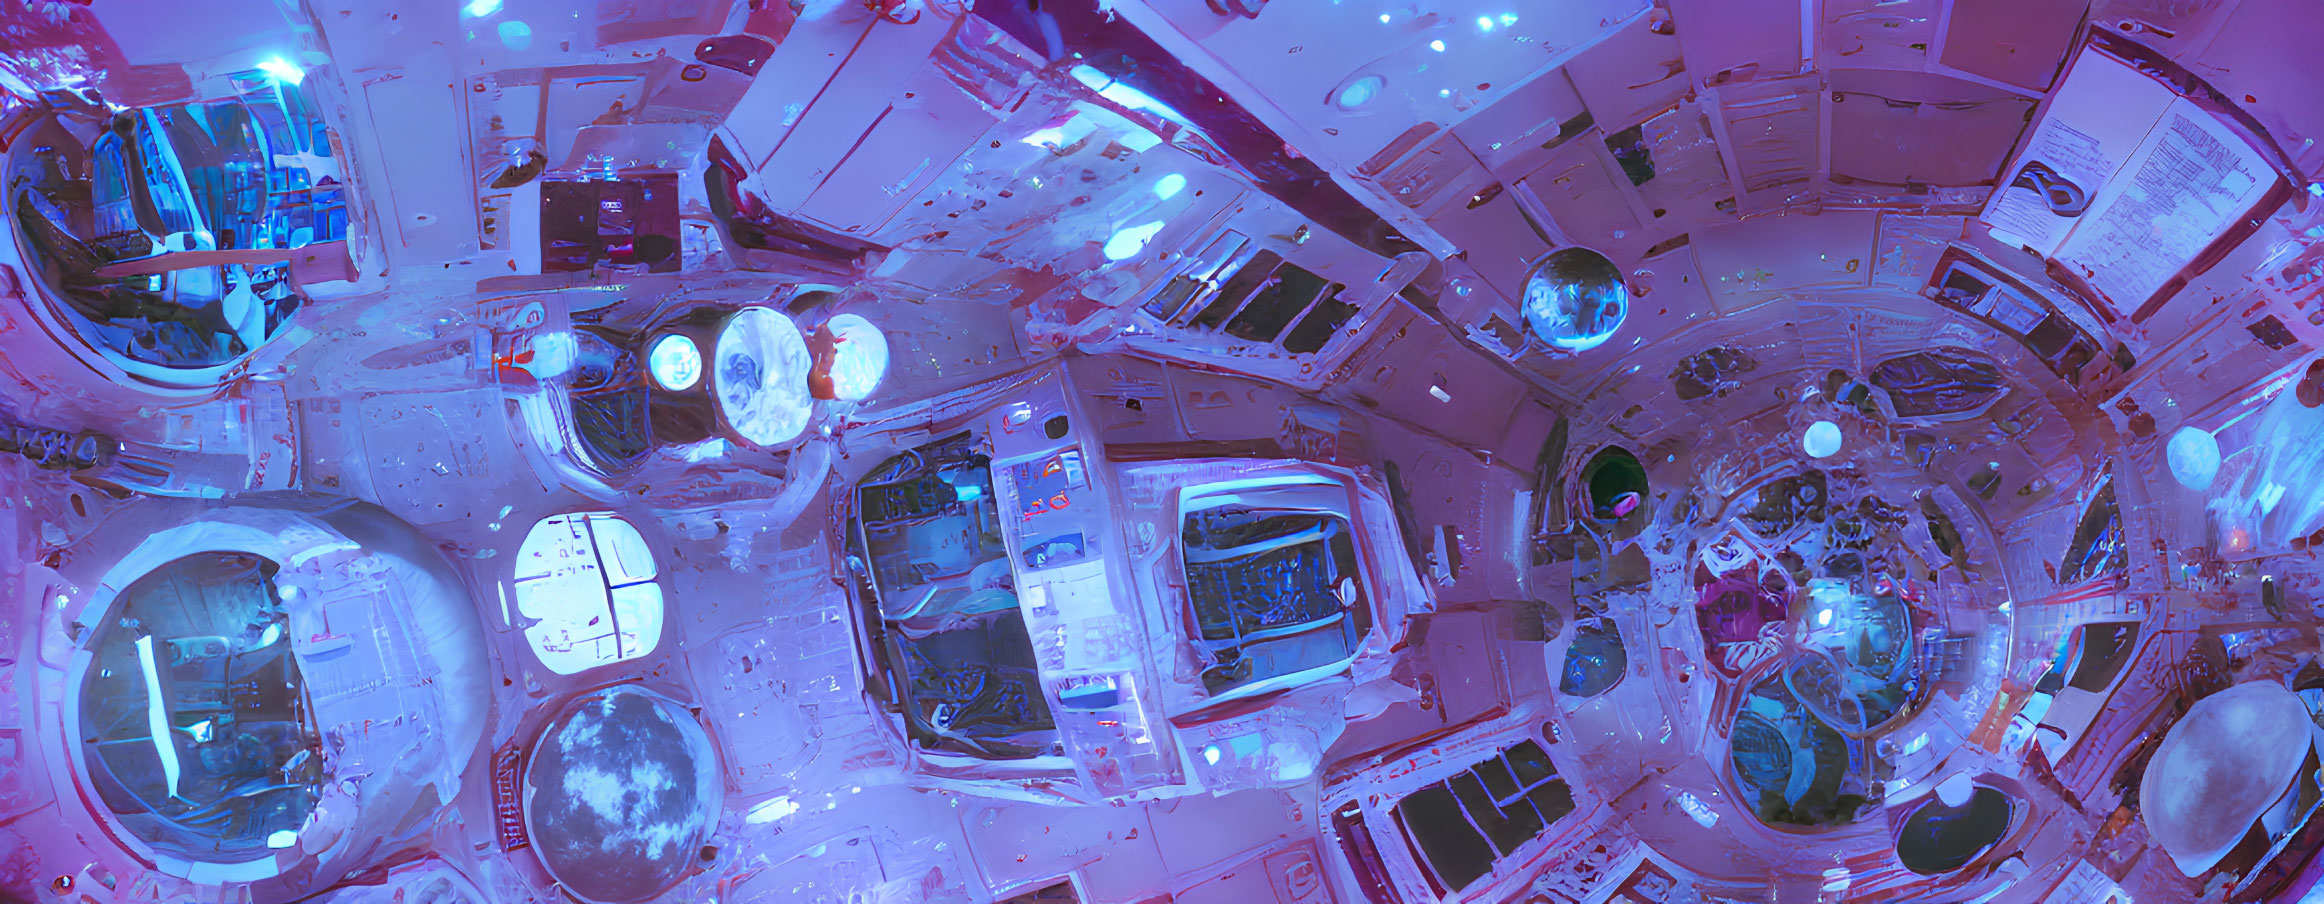 Spacecraft Interior with Control Panels, Screens & Earth View